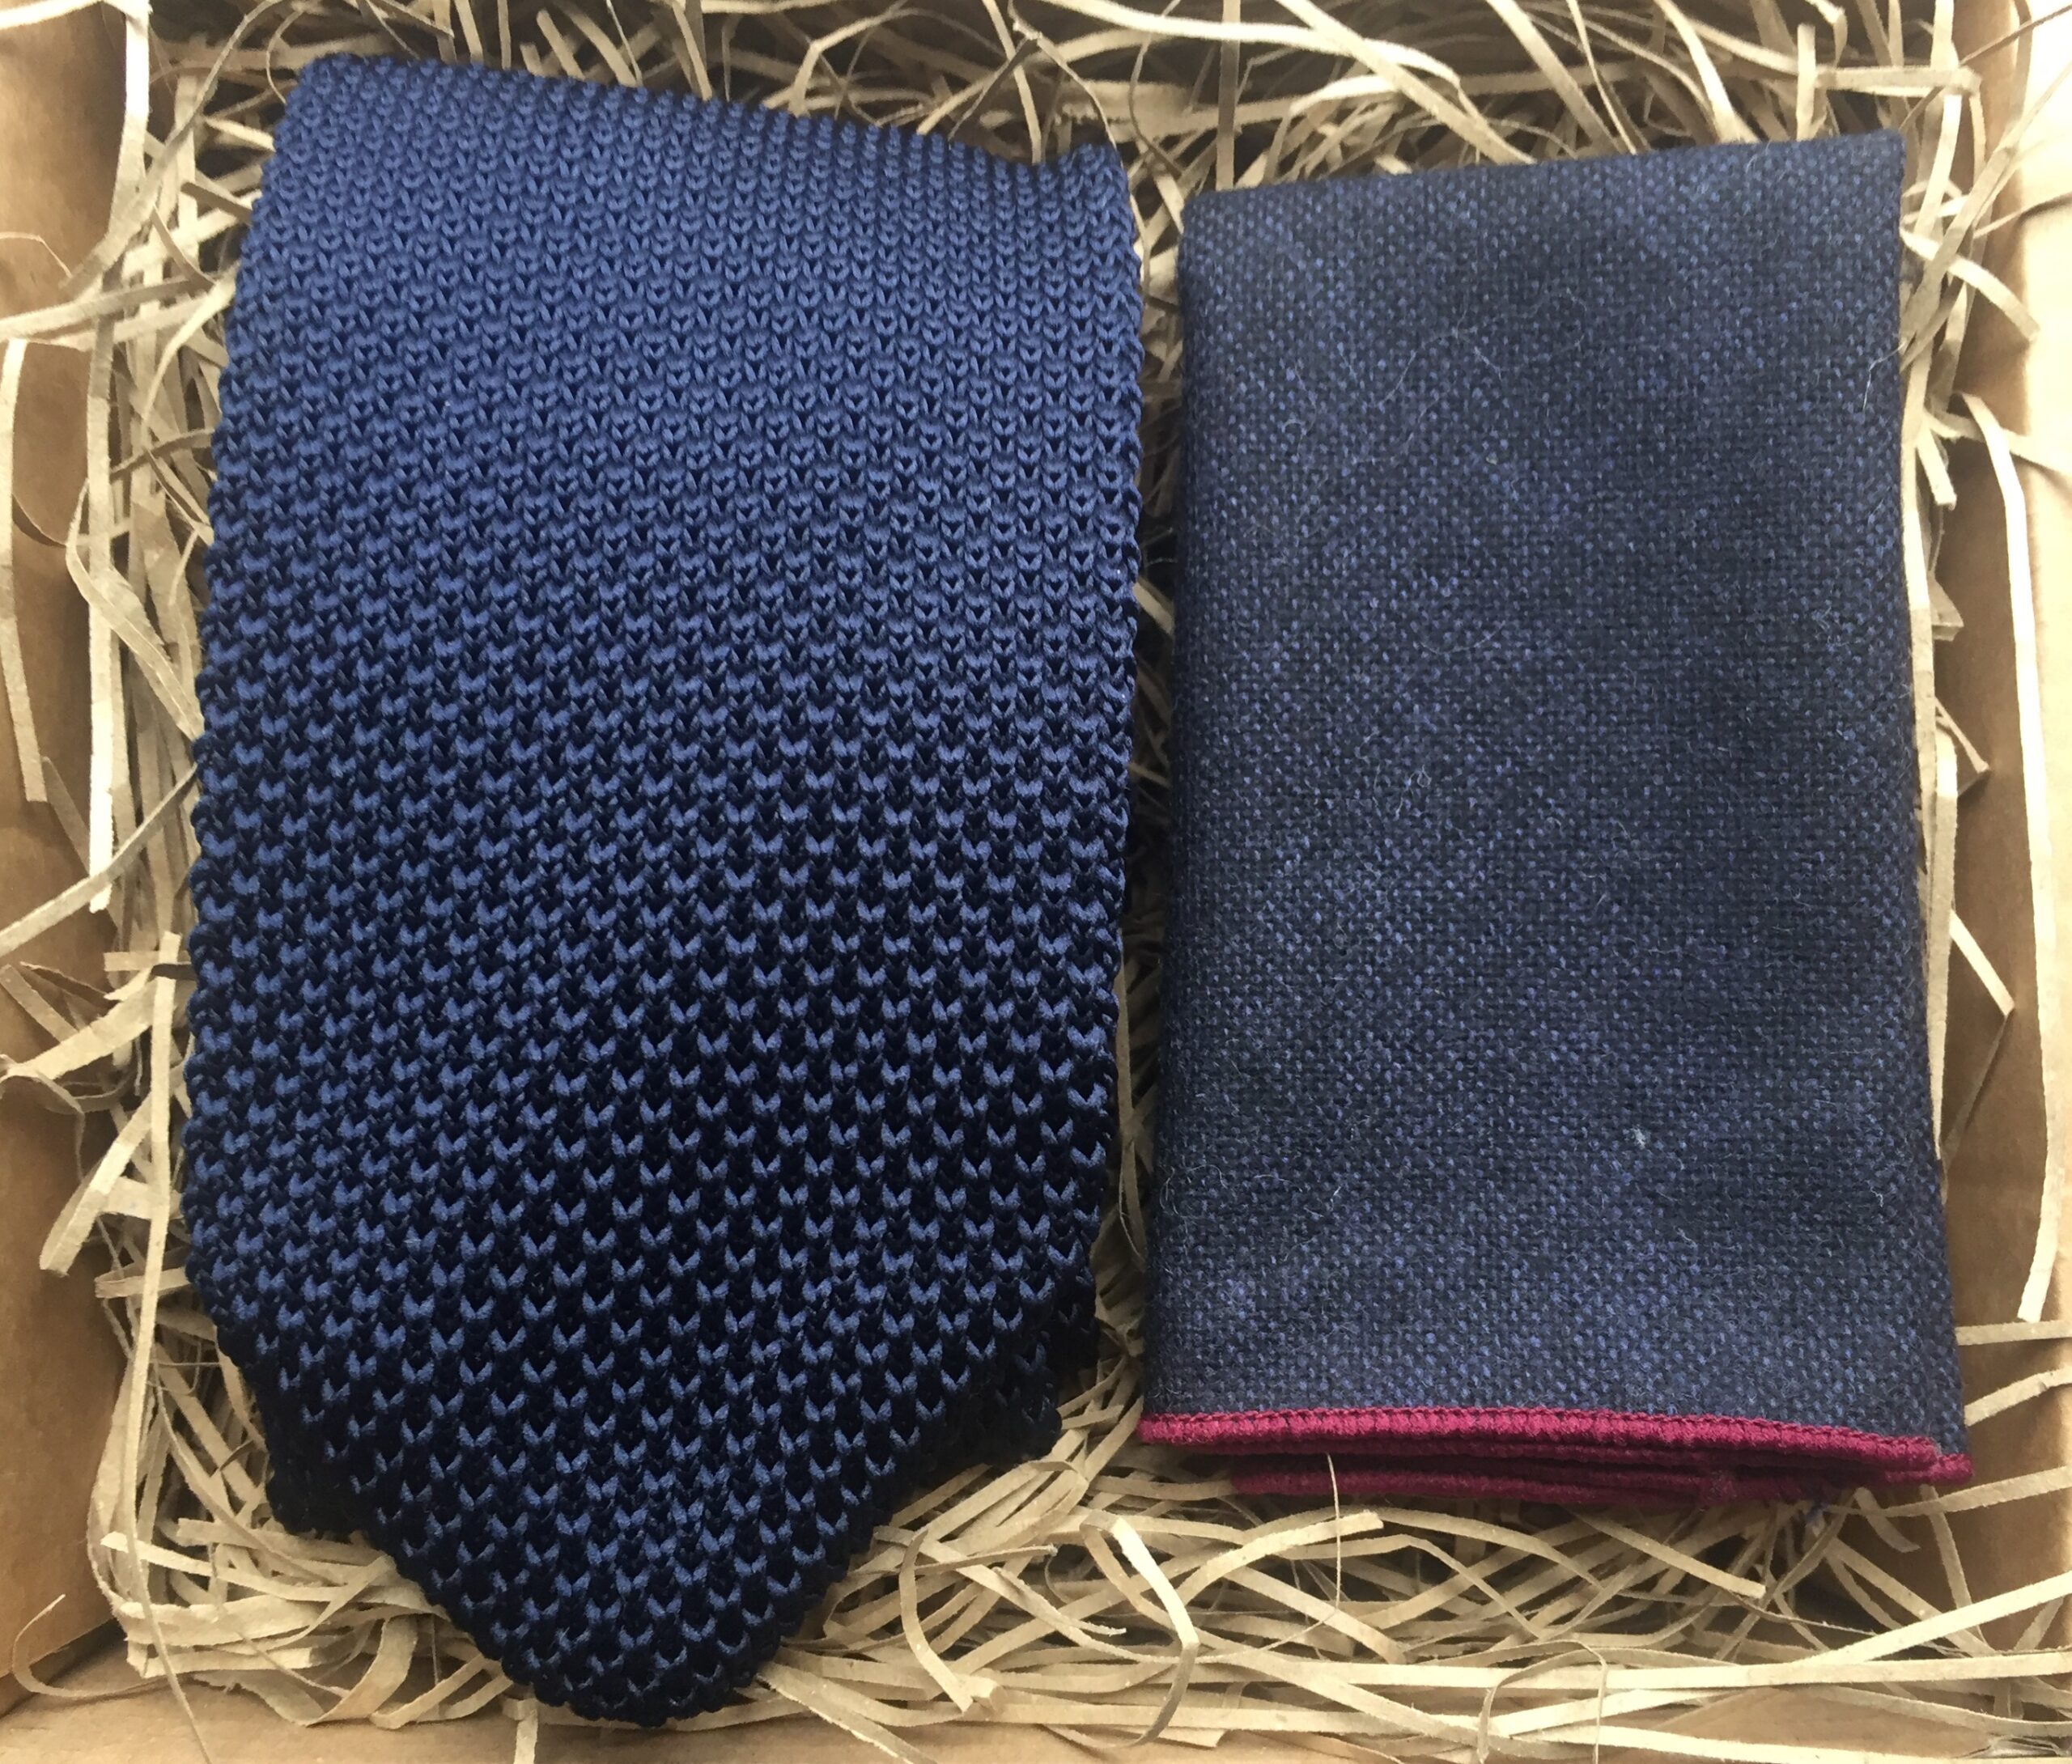 A blue wool tie and pocket square set ideal as a valentines gift, blue wedding tie or groomsmen gift.